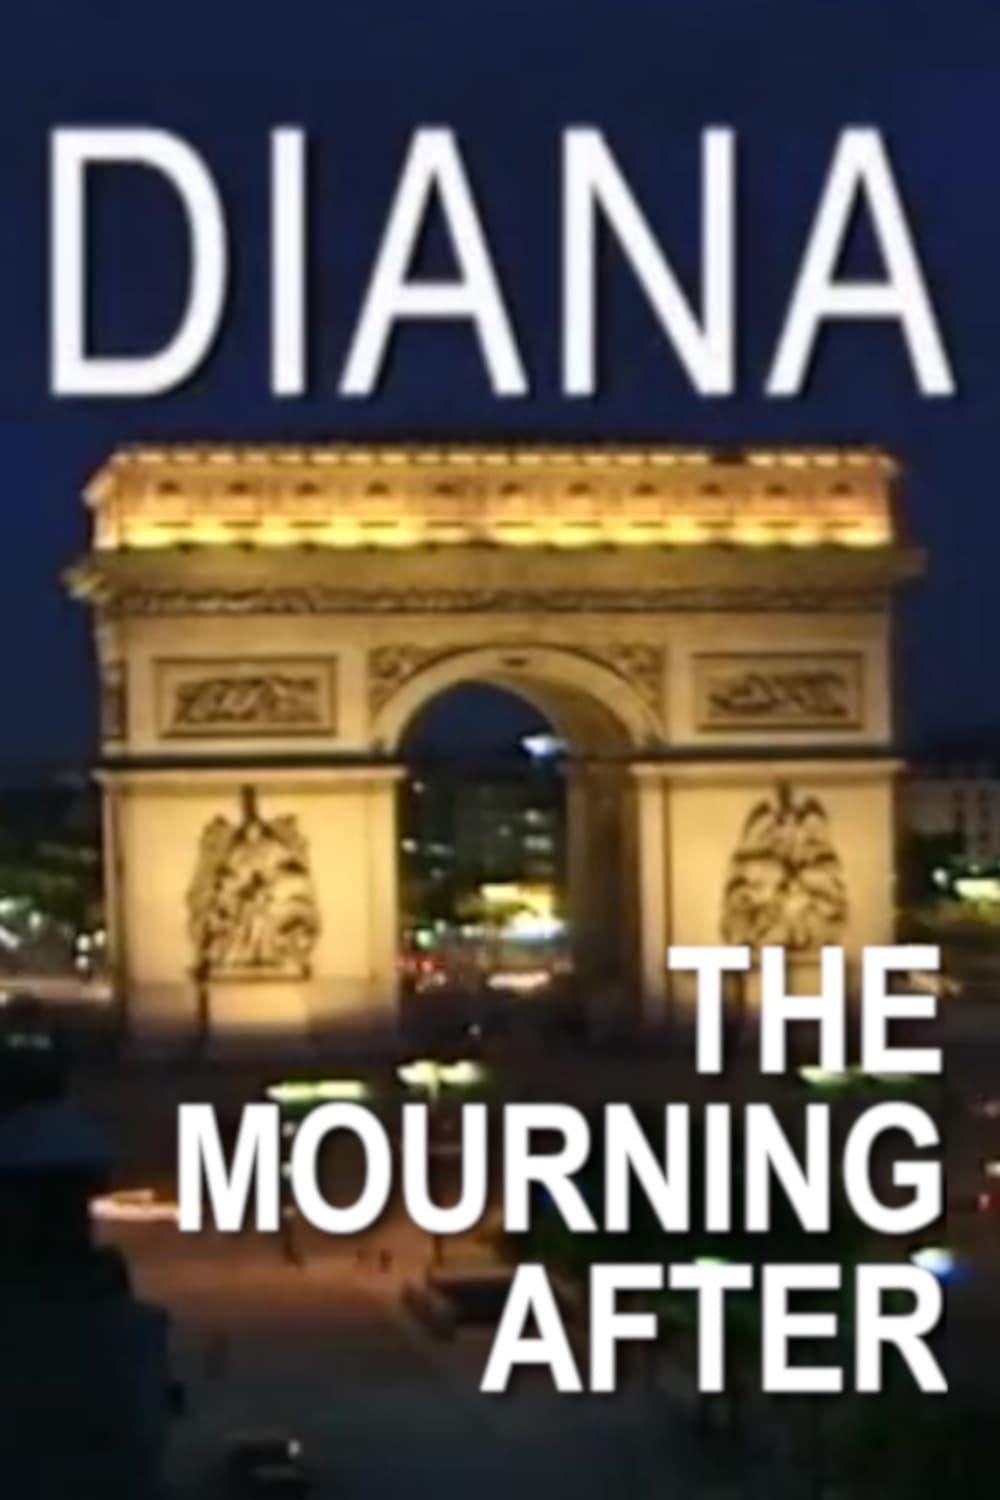 Princess Diana: The Mourning After poster